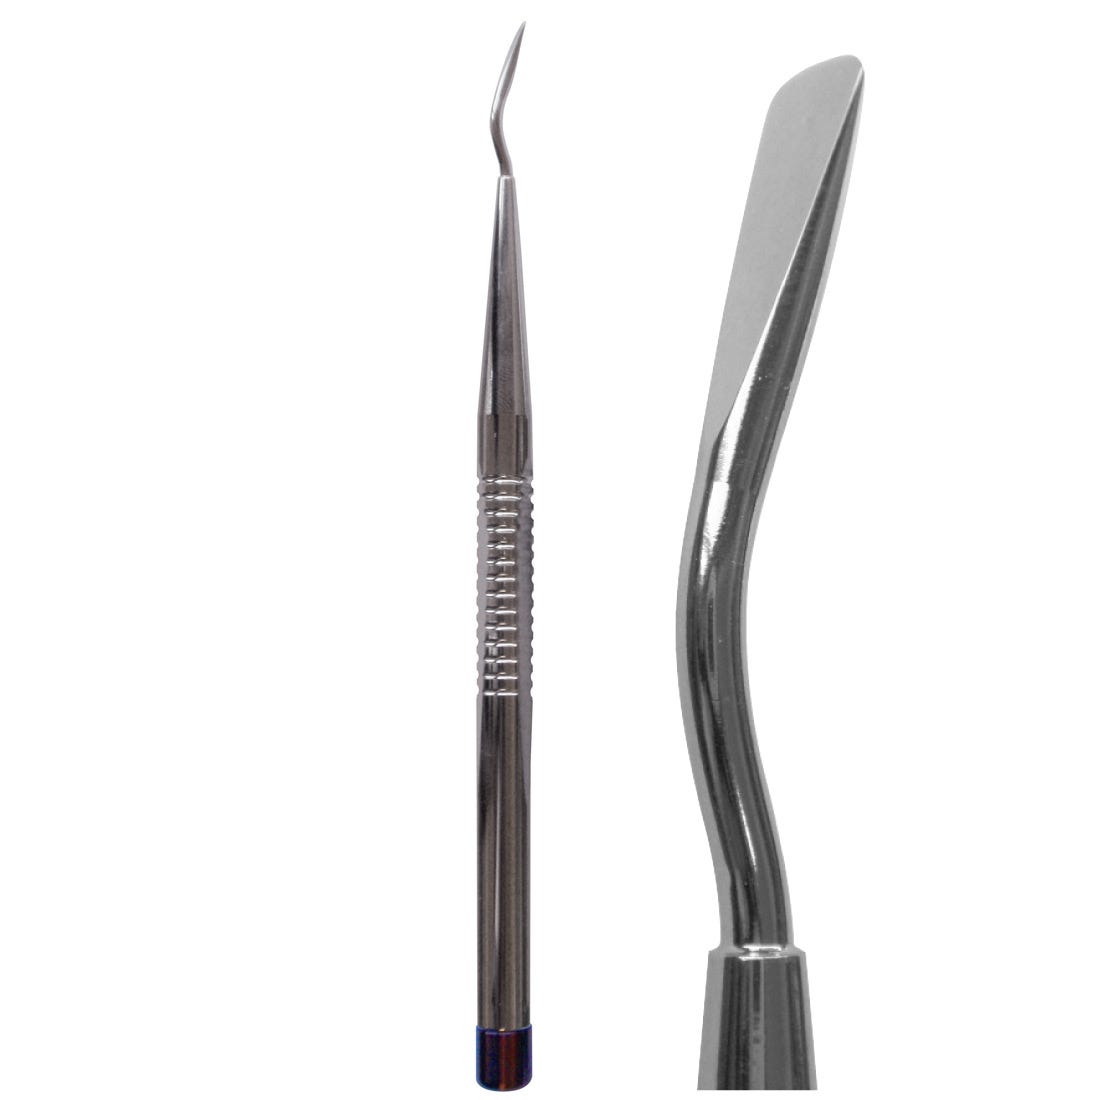 ACE Periodontal Ligament/Luxator Elevator Angled "Out" Brown SS 17-4 (H900) Ti 6Al-4V Eli